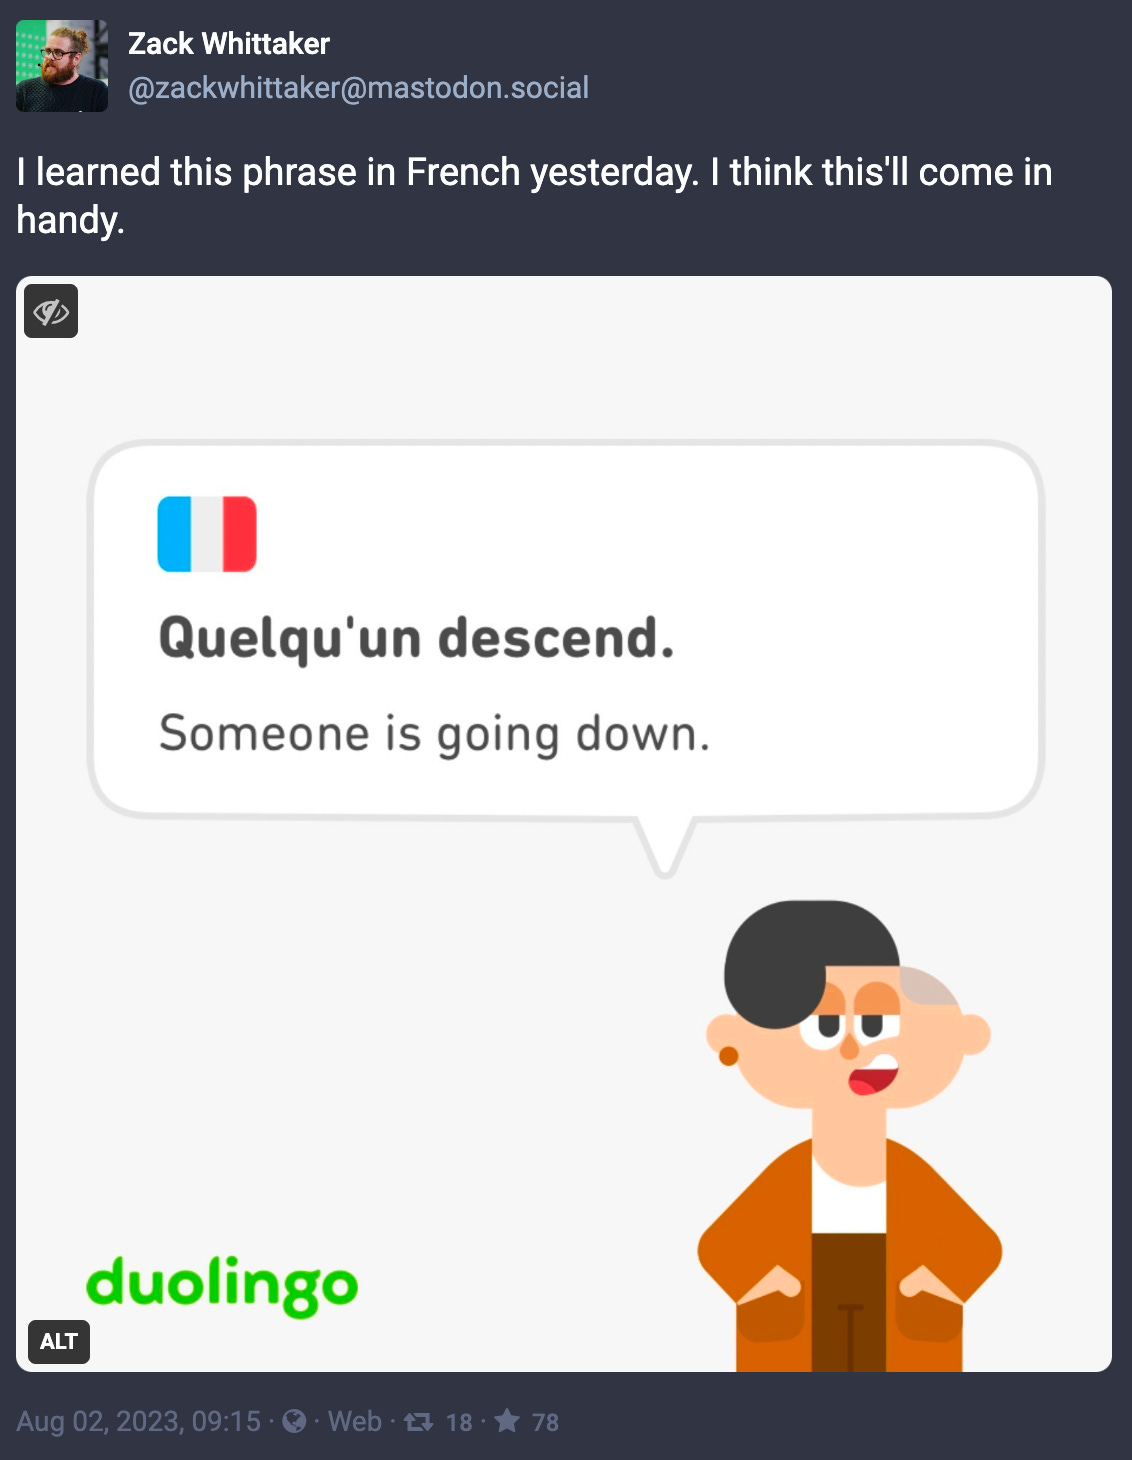 duo lingo lesson - caption “I learned this phrase in French yesterday. I think it’ll come in handy.” Image of the duo lingo character saying “Quelqu’un descend.” Translated as “Someone is going down.”